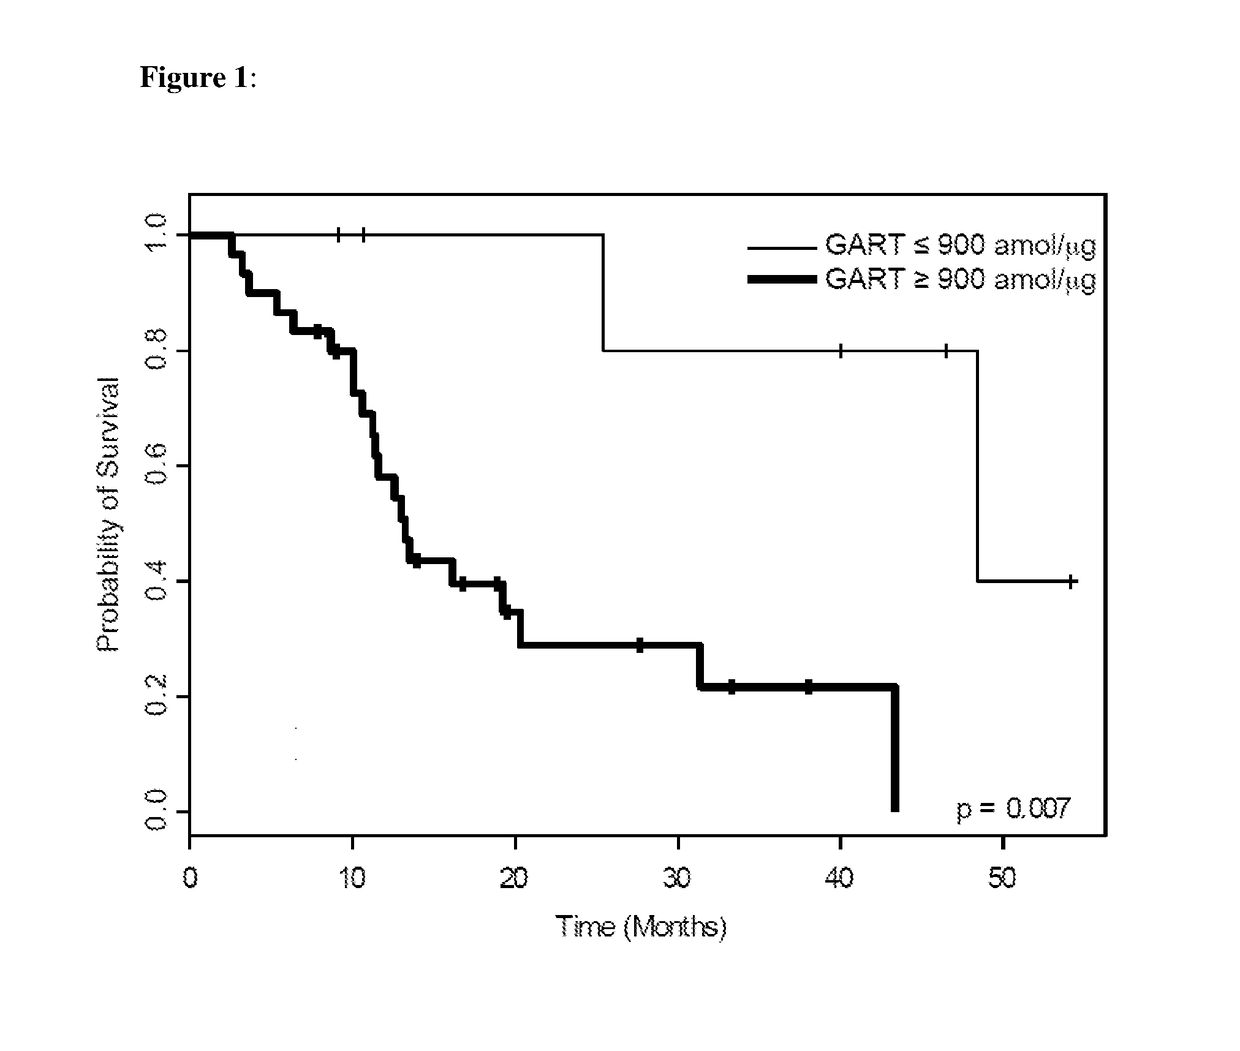 Quantifying FR-α and GART proteins for optimal cancer therapy